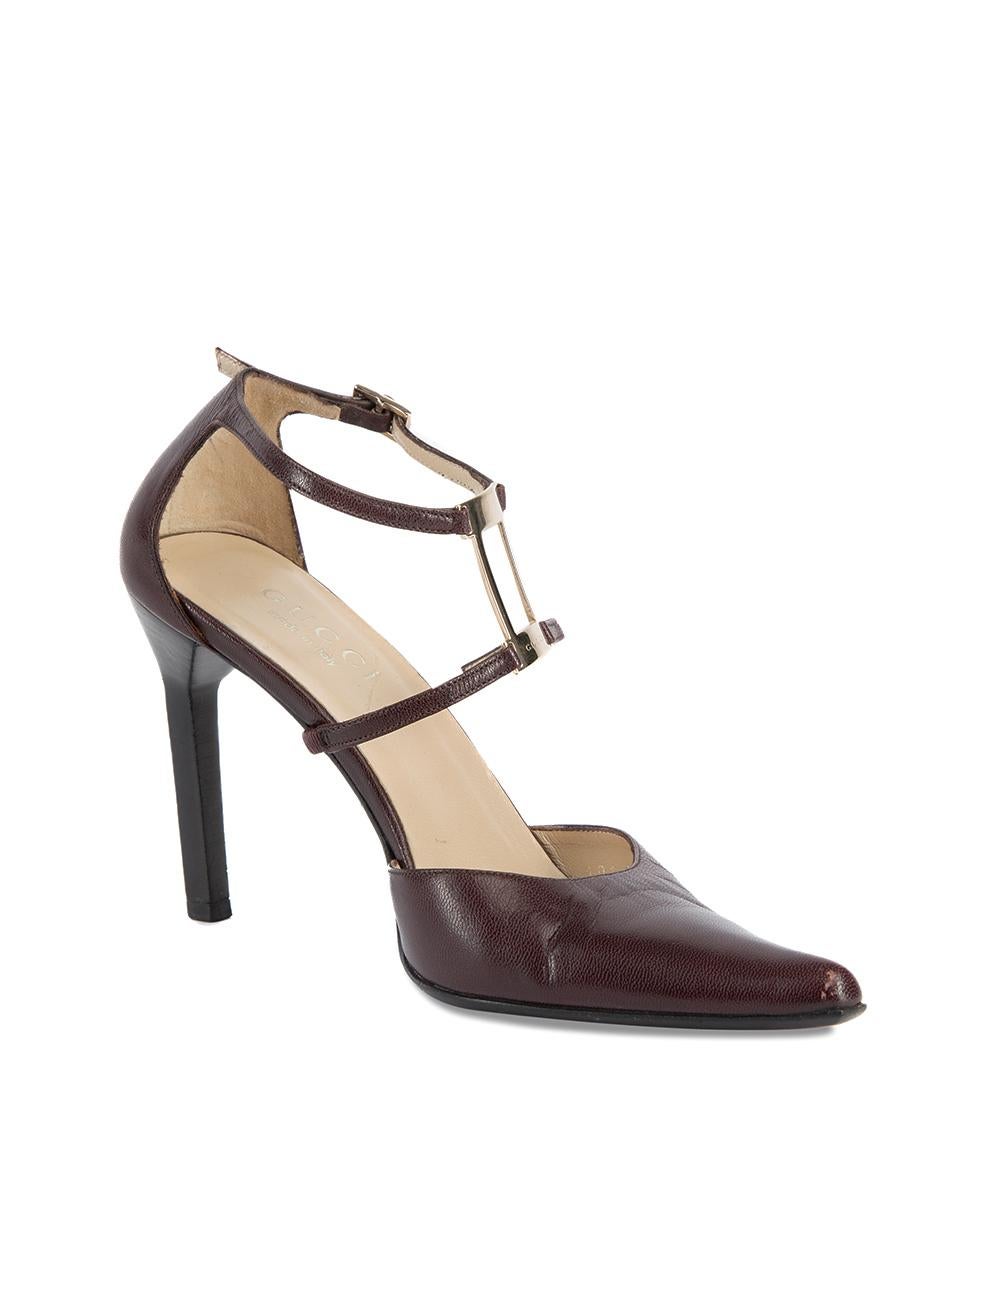 CONDITION is Very good. Minimal wear to heels is evident. Creasing to leather material near the toes on both shoes can be seen on this used Gucci designer resale item. Details Dark purple Leather Pointed toe Stiletto heel Strappy with Gucci engraved